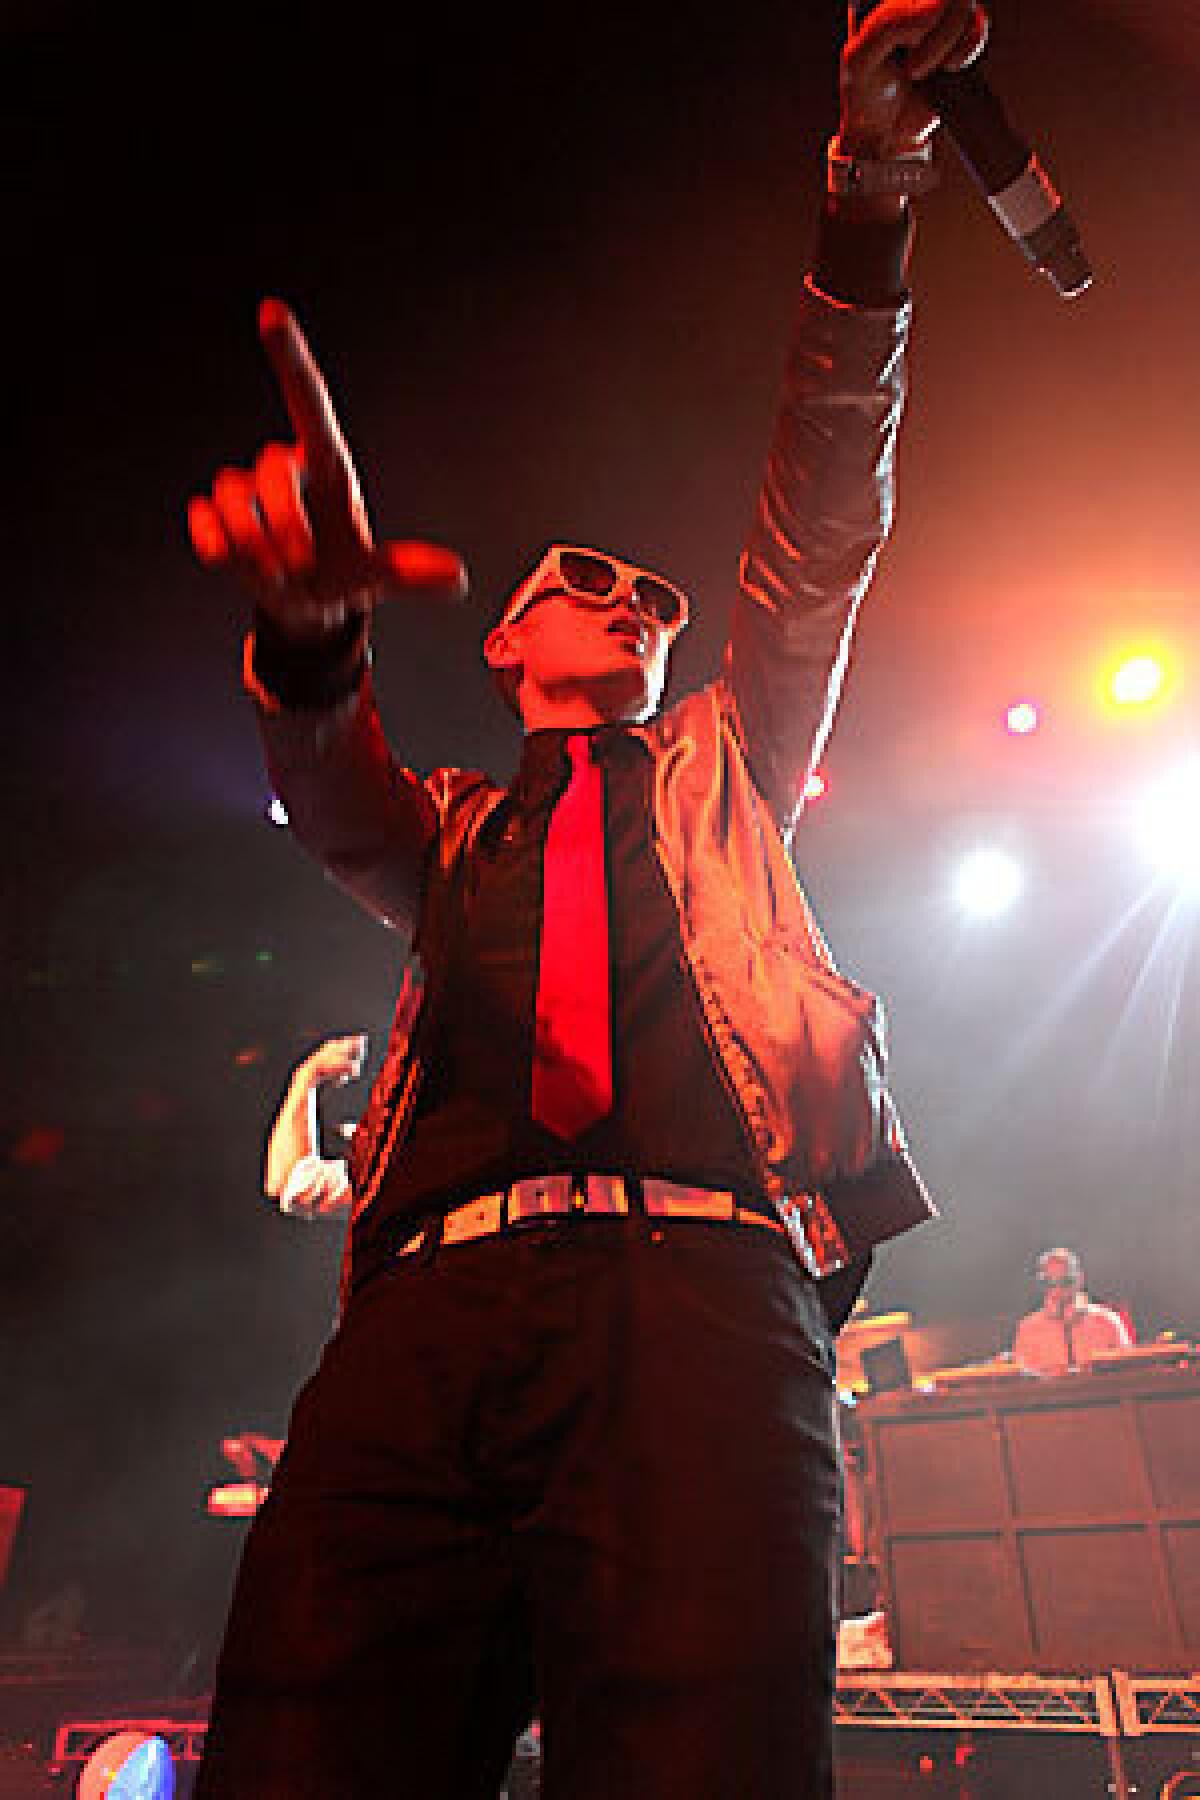 Far East Movement performing at Power 106's Cali Christmas in Los Angeles.